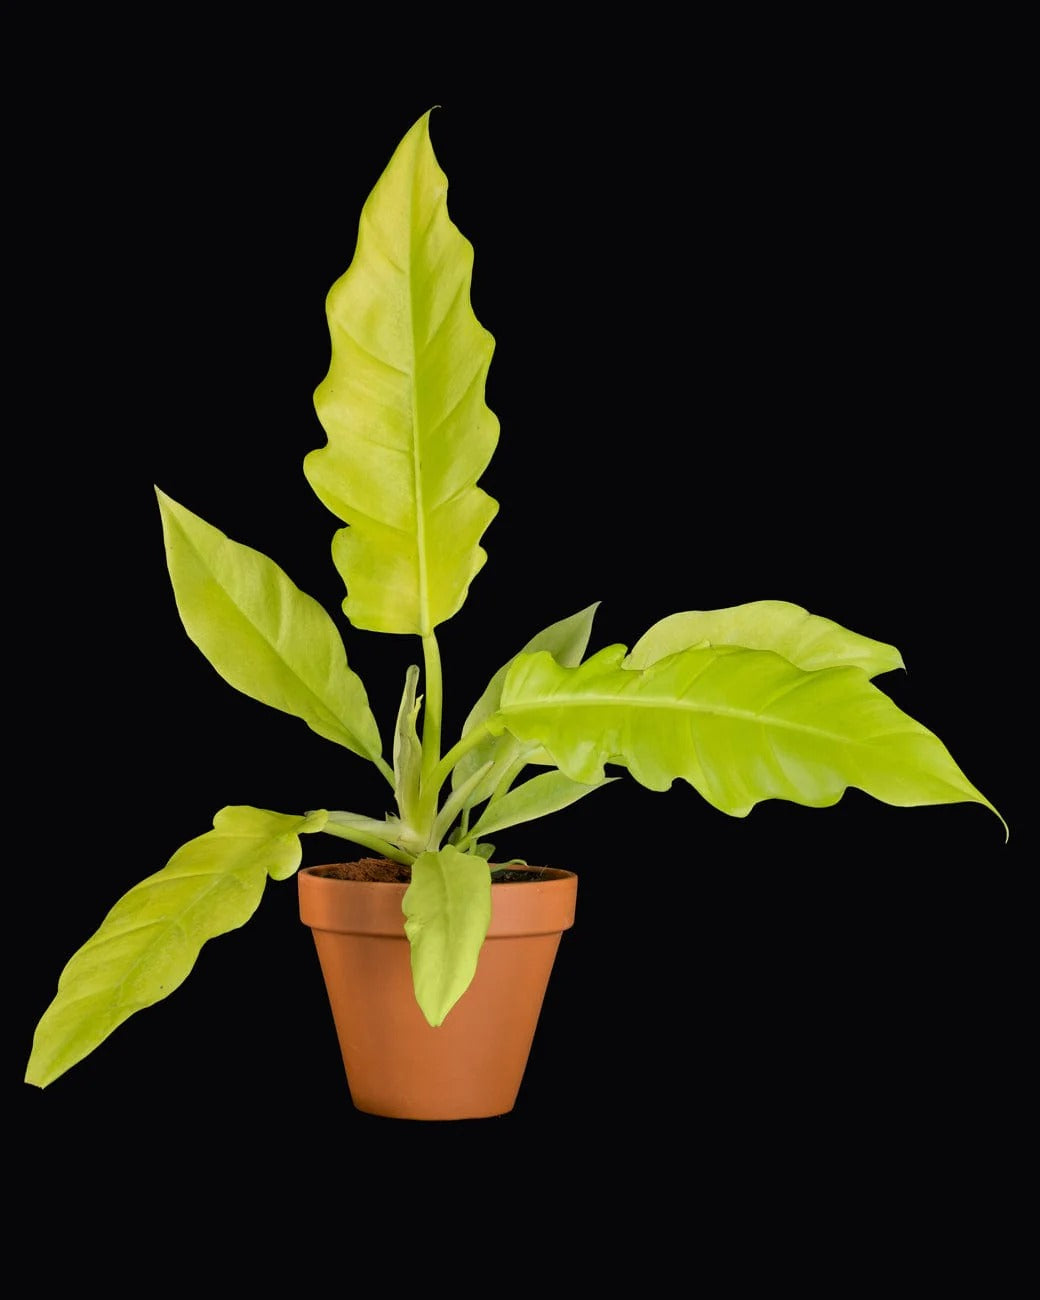 Golden Saw Philodendron in terra cotta pot